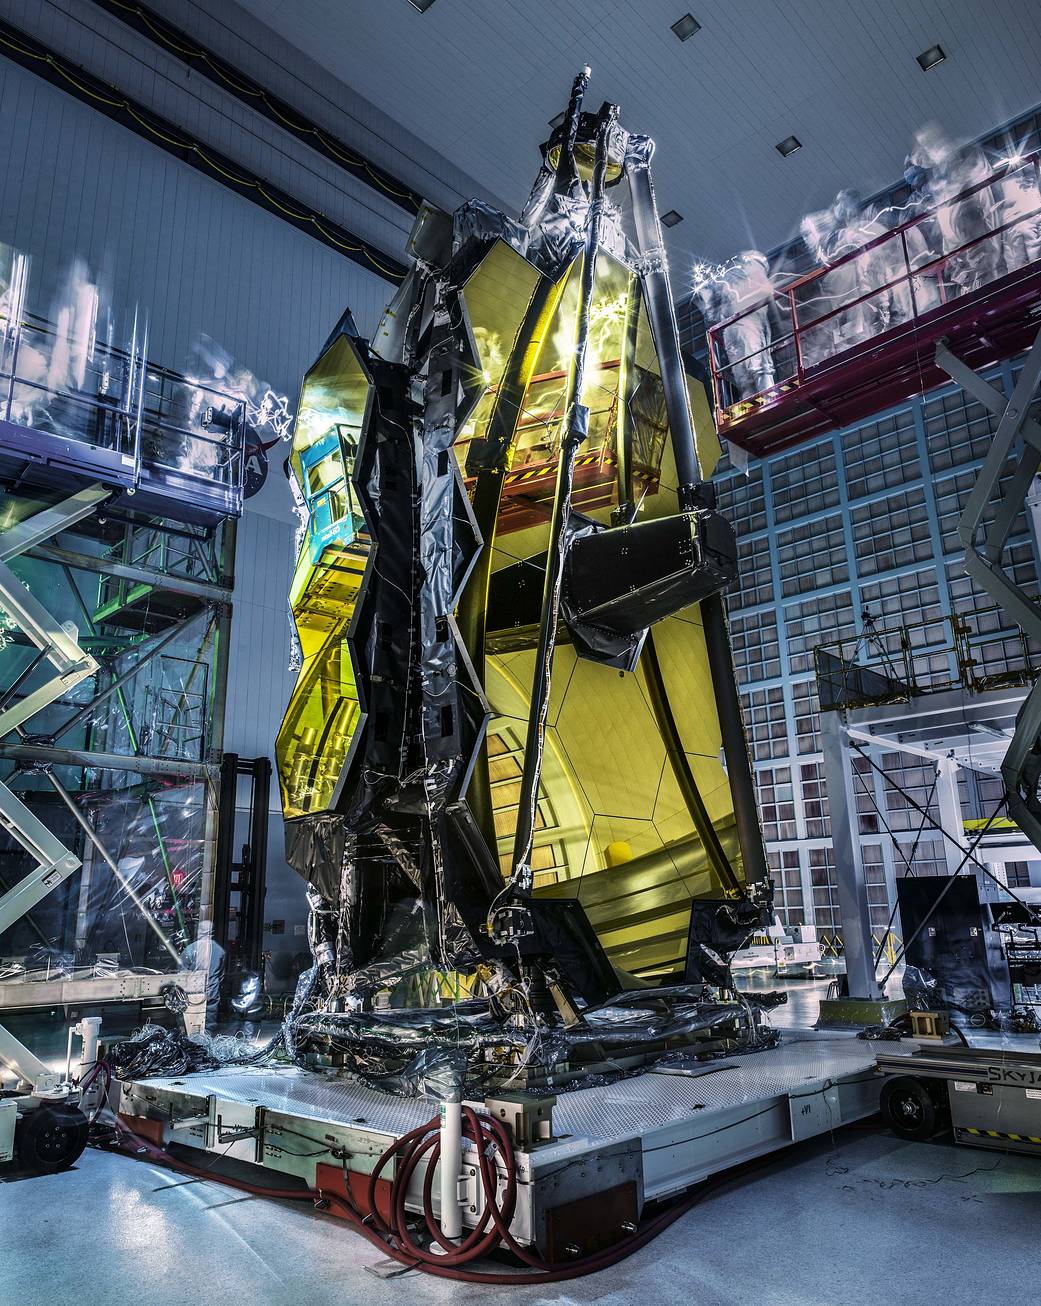 Why The Hell Does The James Webb Space Telescope Look Haunted?